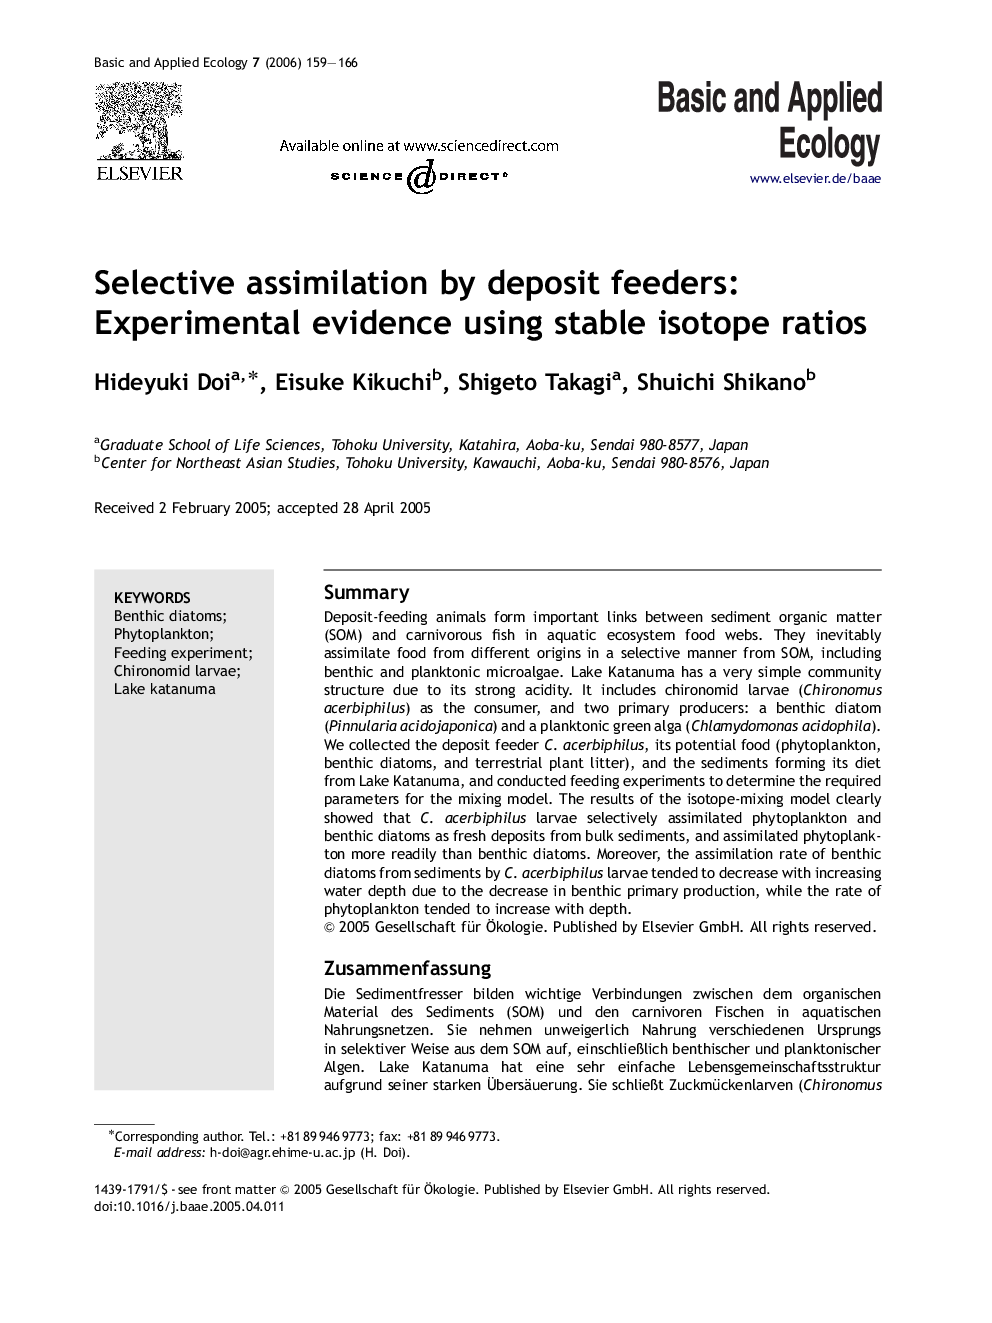 Selective assimilation by deposit feeders: Experimental evidence using stable isotope ratios